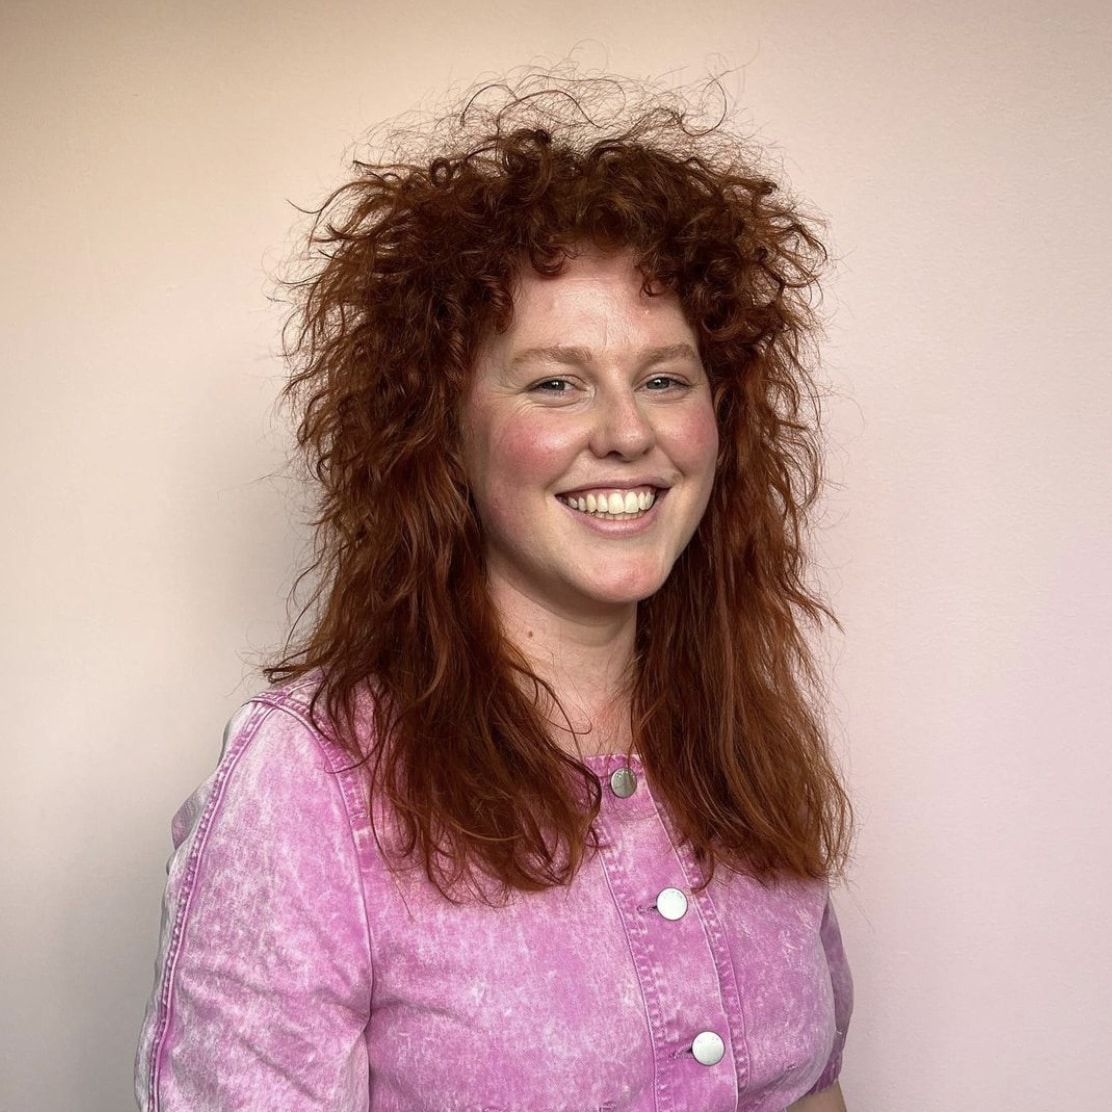 woman with red curly hair